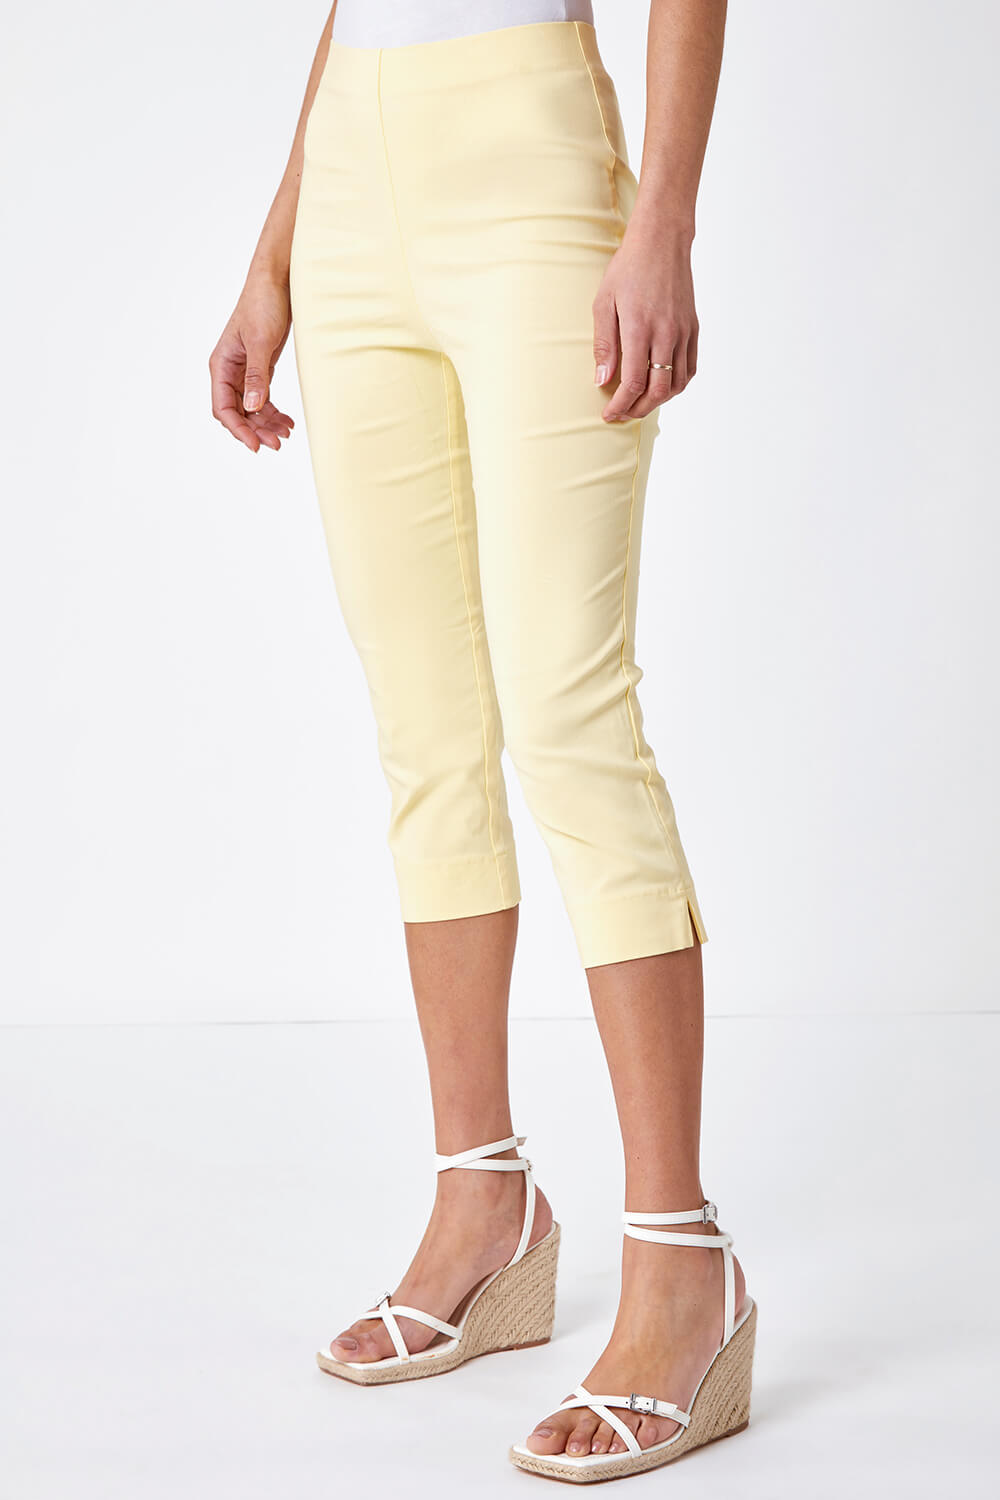 Lemon  Cropped Stretch Trouser, Image 5 of 6